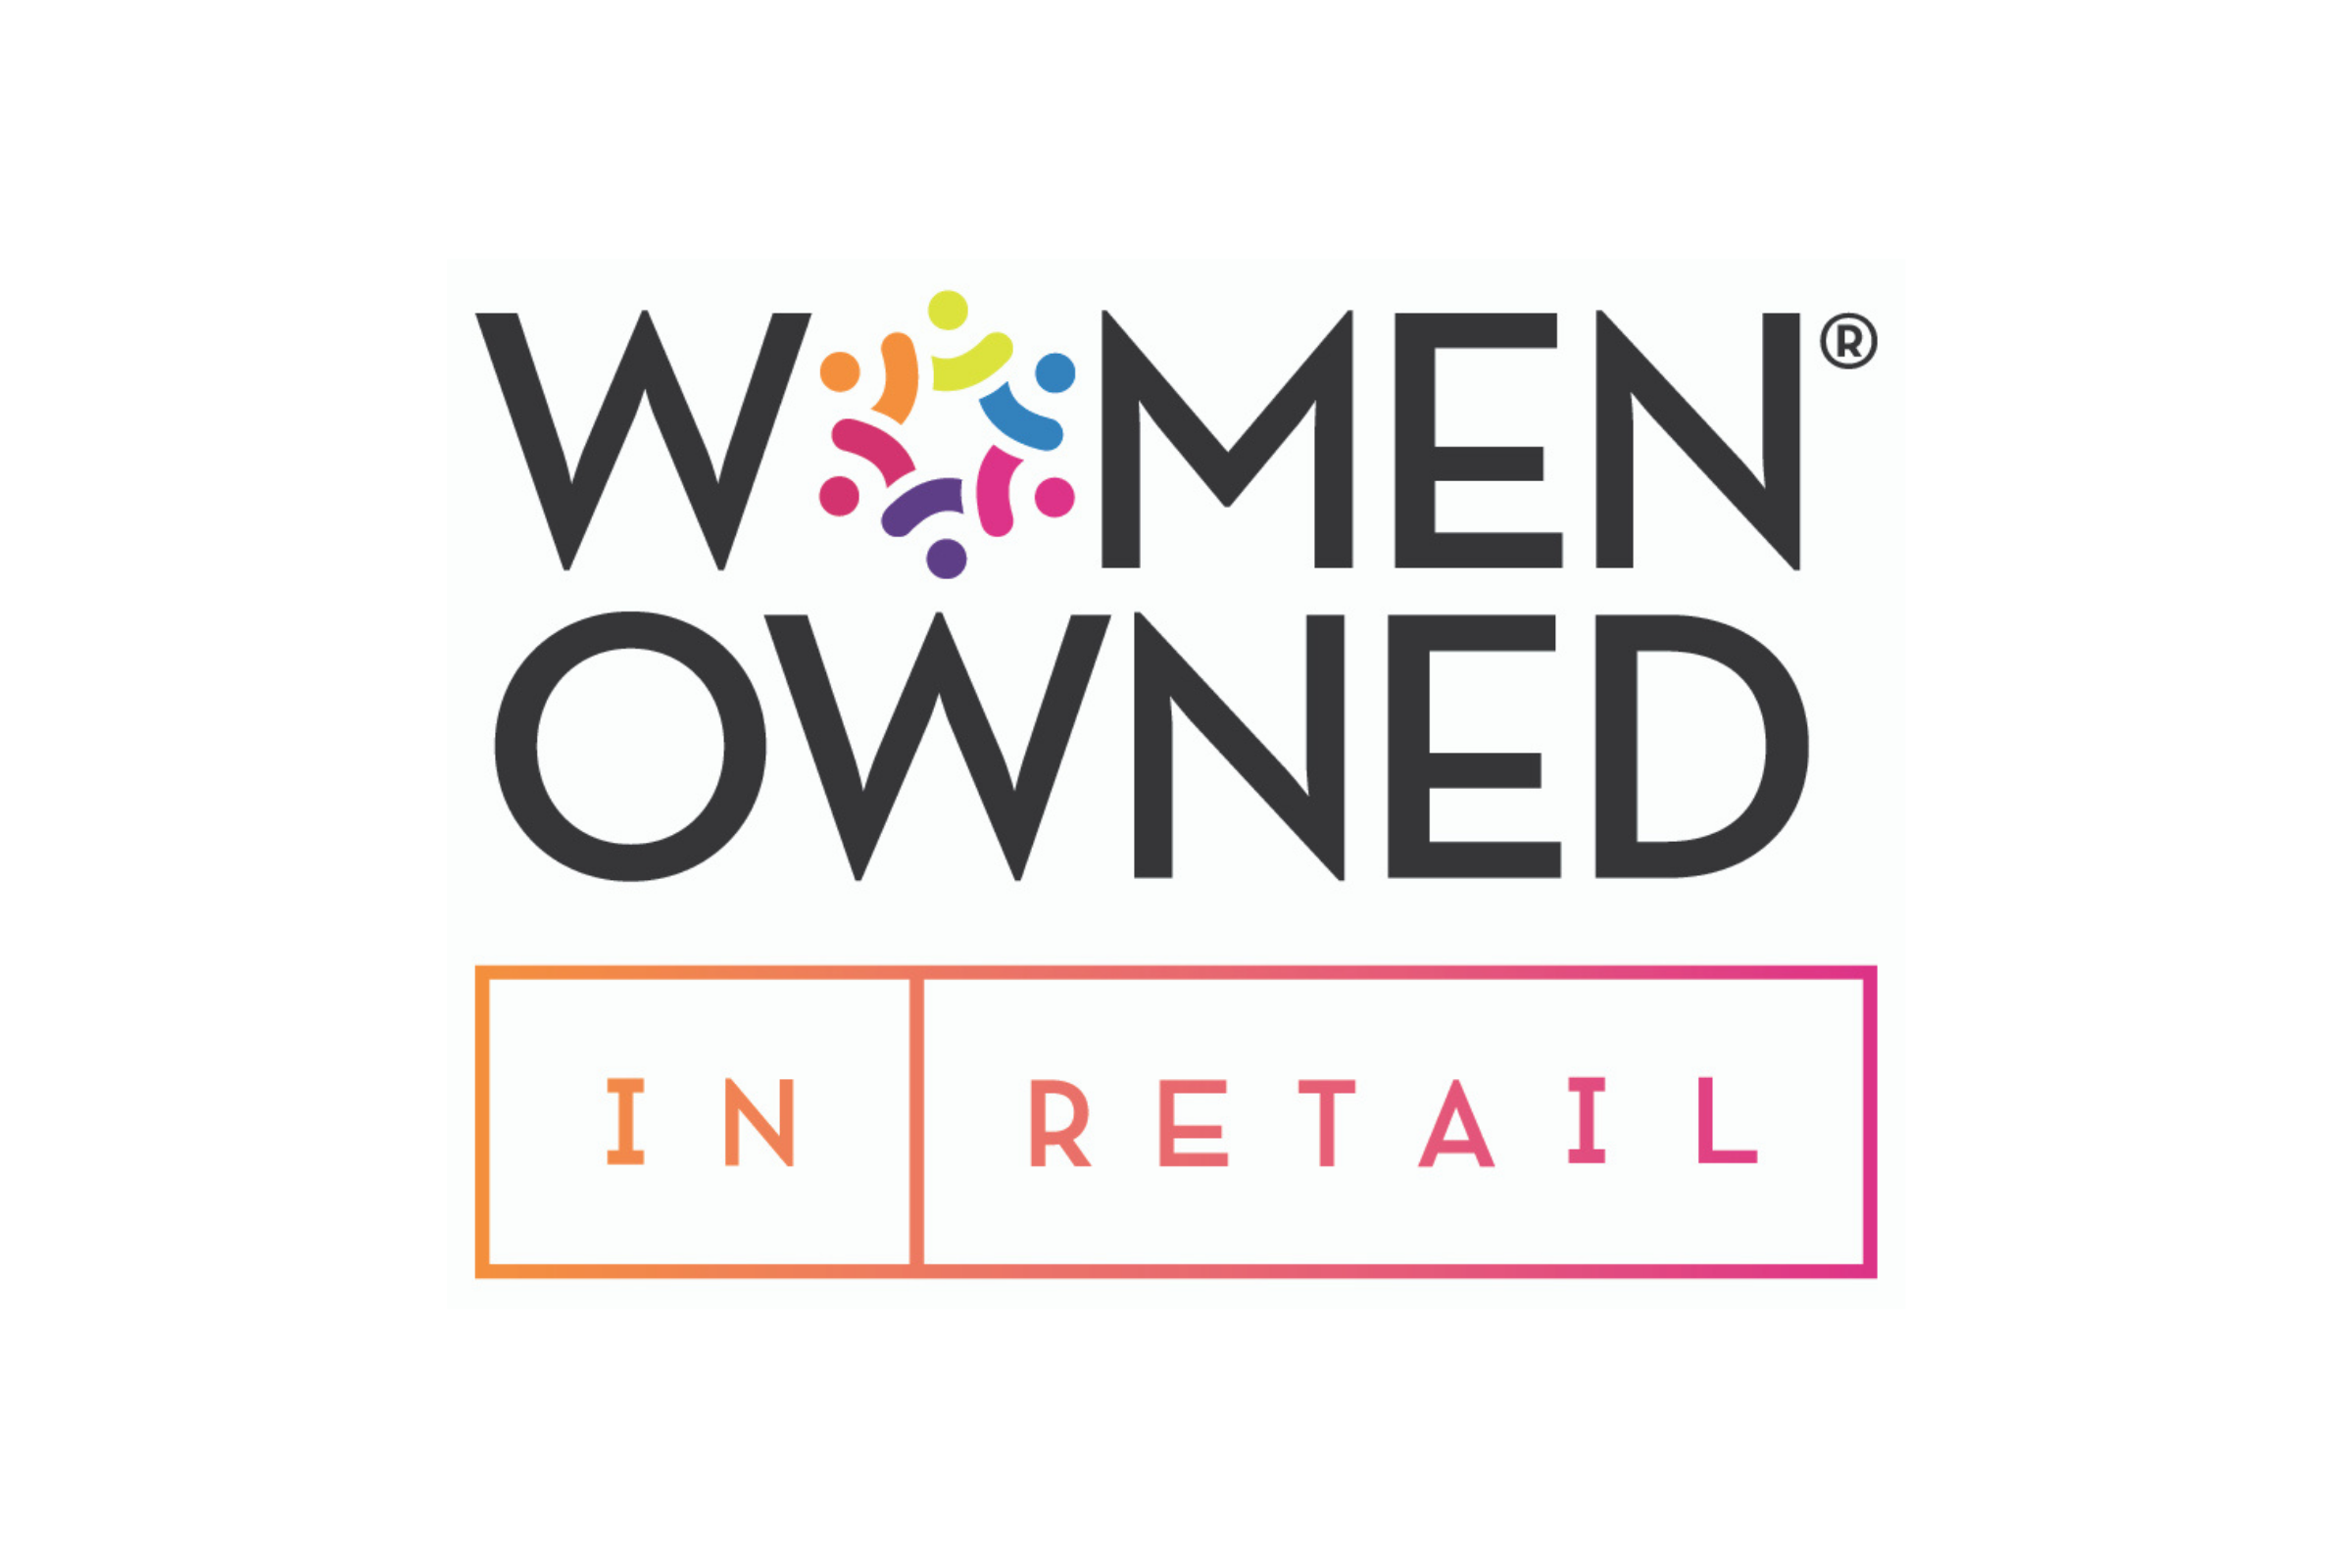 What Every Woman Wants (retail chain) - Wikipedia